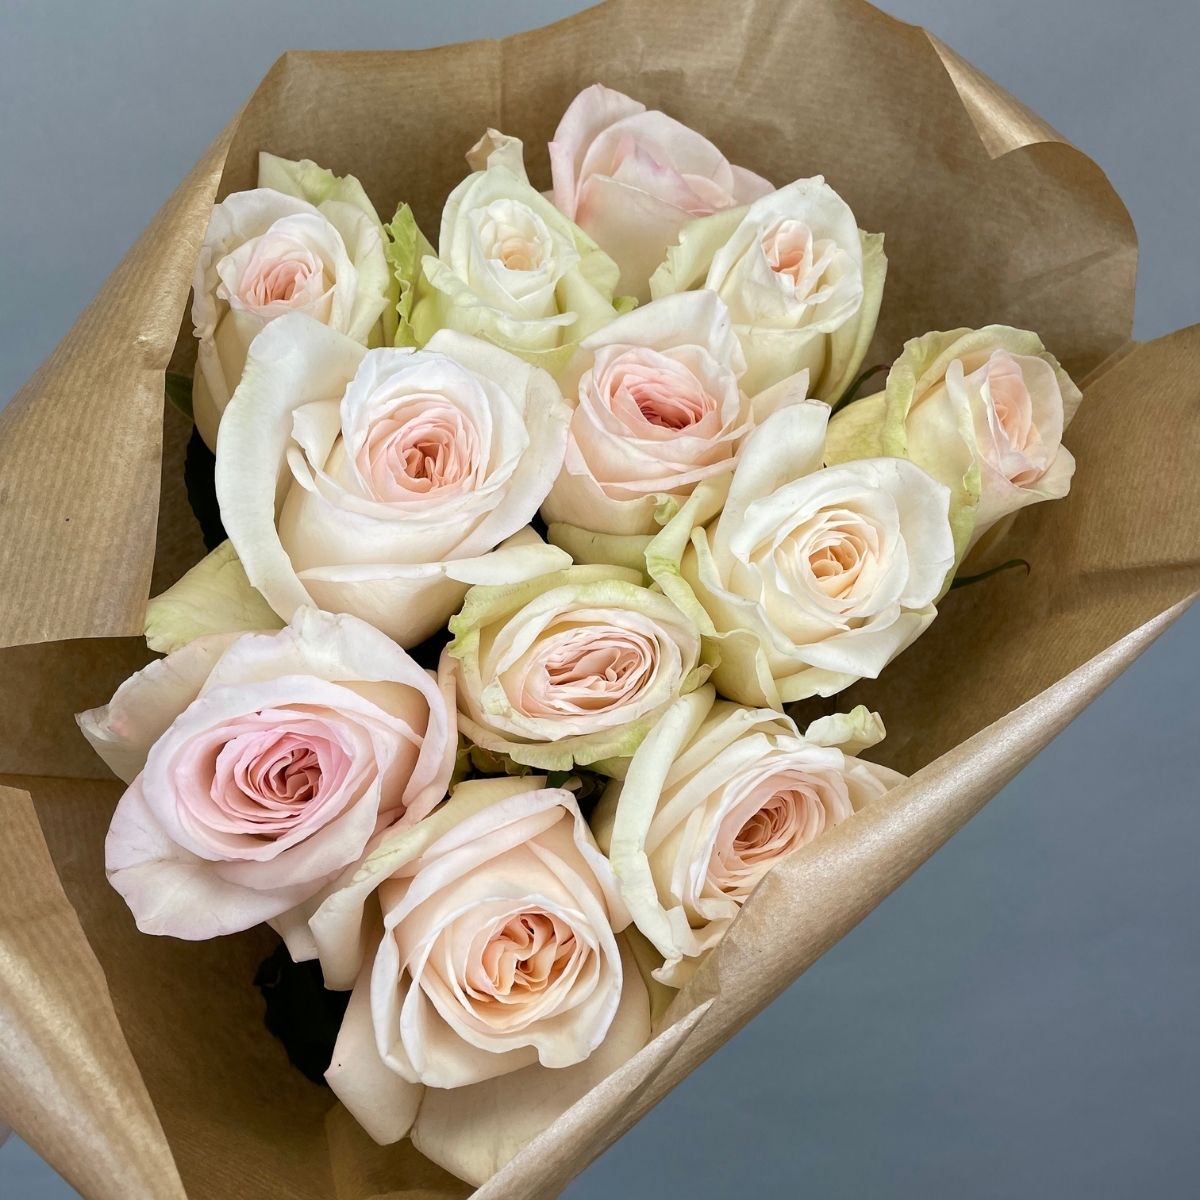 white-ohara-roses-of-delbard-are-amazing-featured